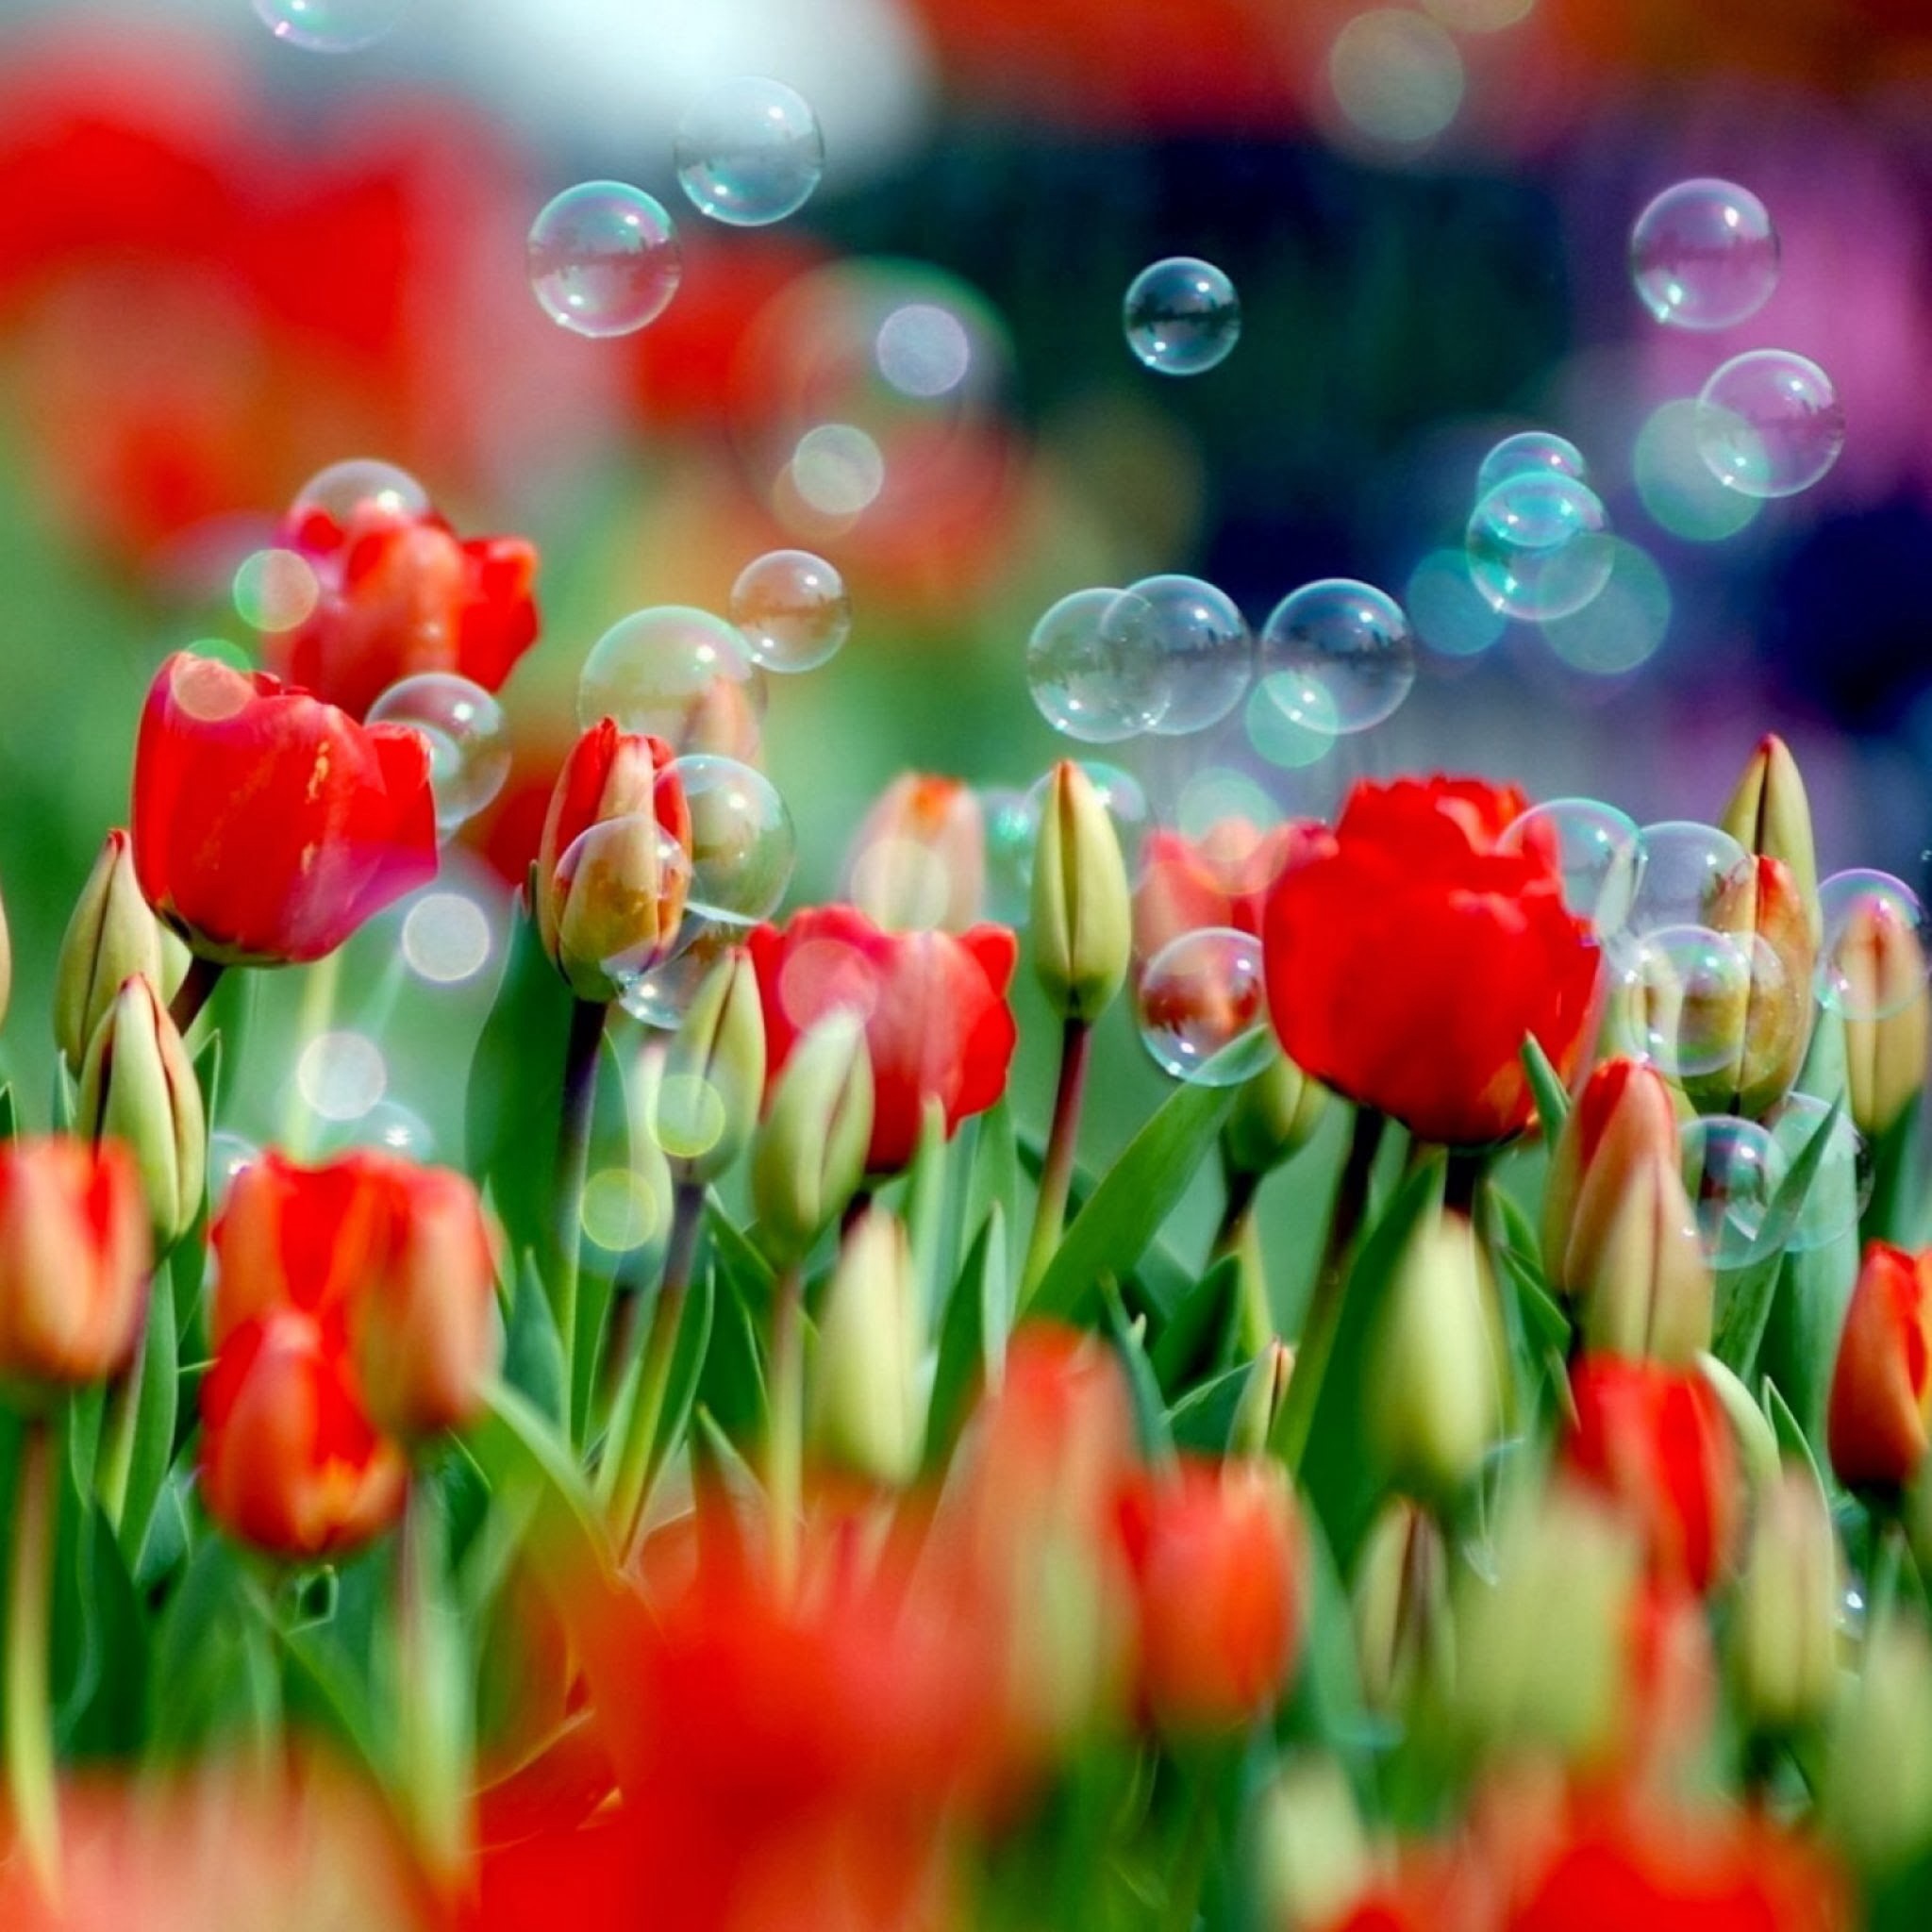 Colorful Flowers Hd Wallpaper Free Download - Flower Scenery Images Hd , HD Wallpaper & Backgrounds